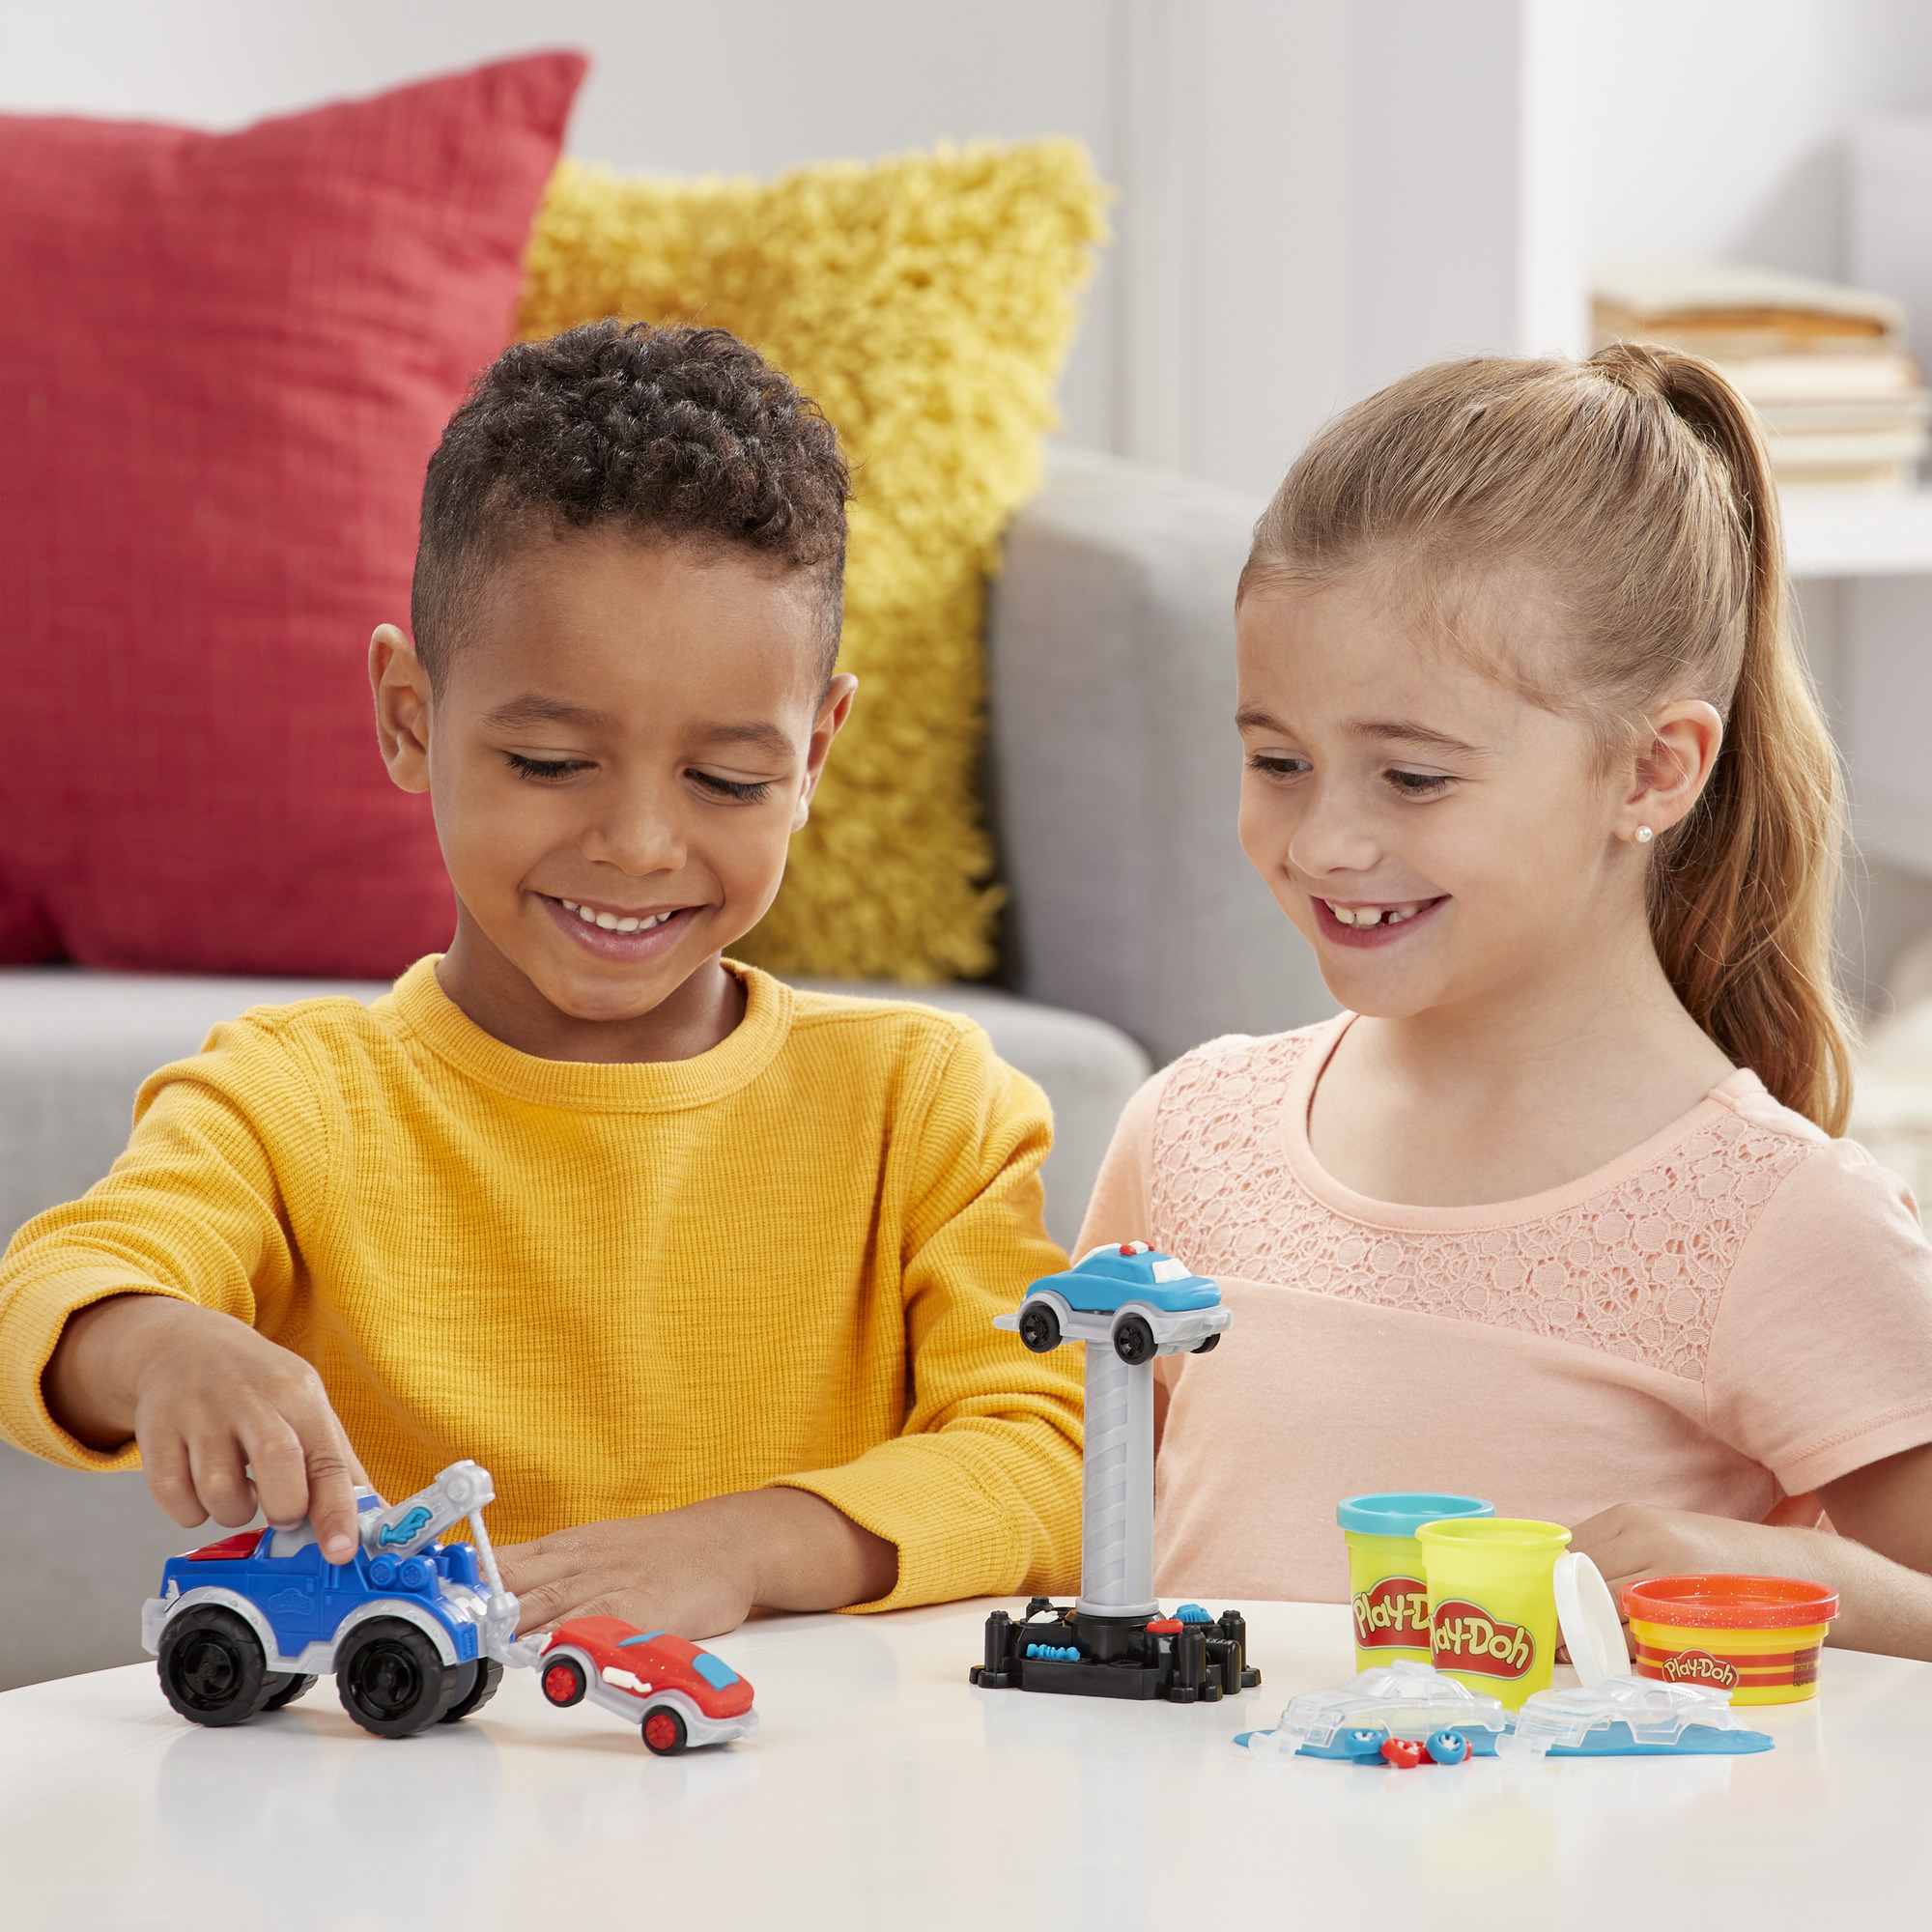 Play-Doh Wheels Tow Truck Toy with 3 Non-Toxic Play-Doh Colors, (6 oz) - image 8 of 14